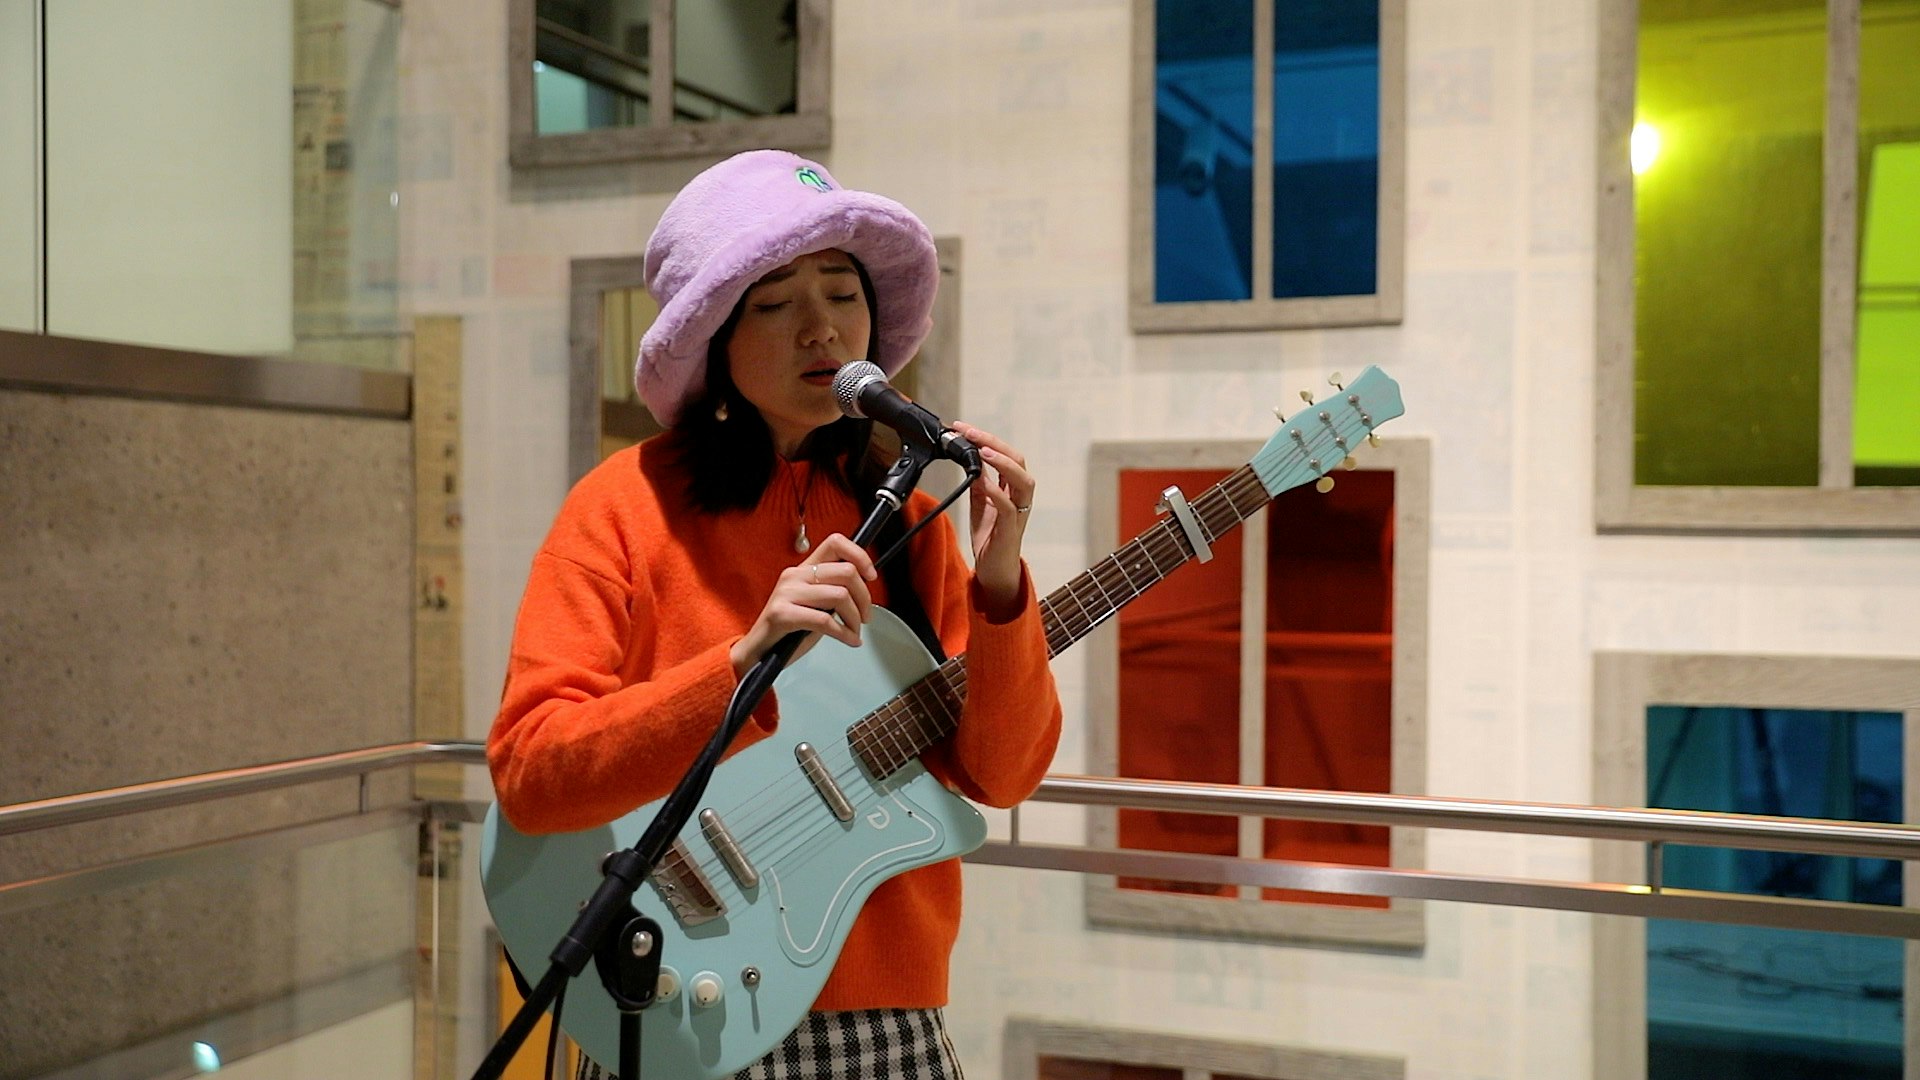 A person wearing a mauve hat and orange top, holding a light blue guitar, sings into a microwave.